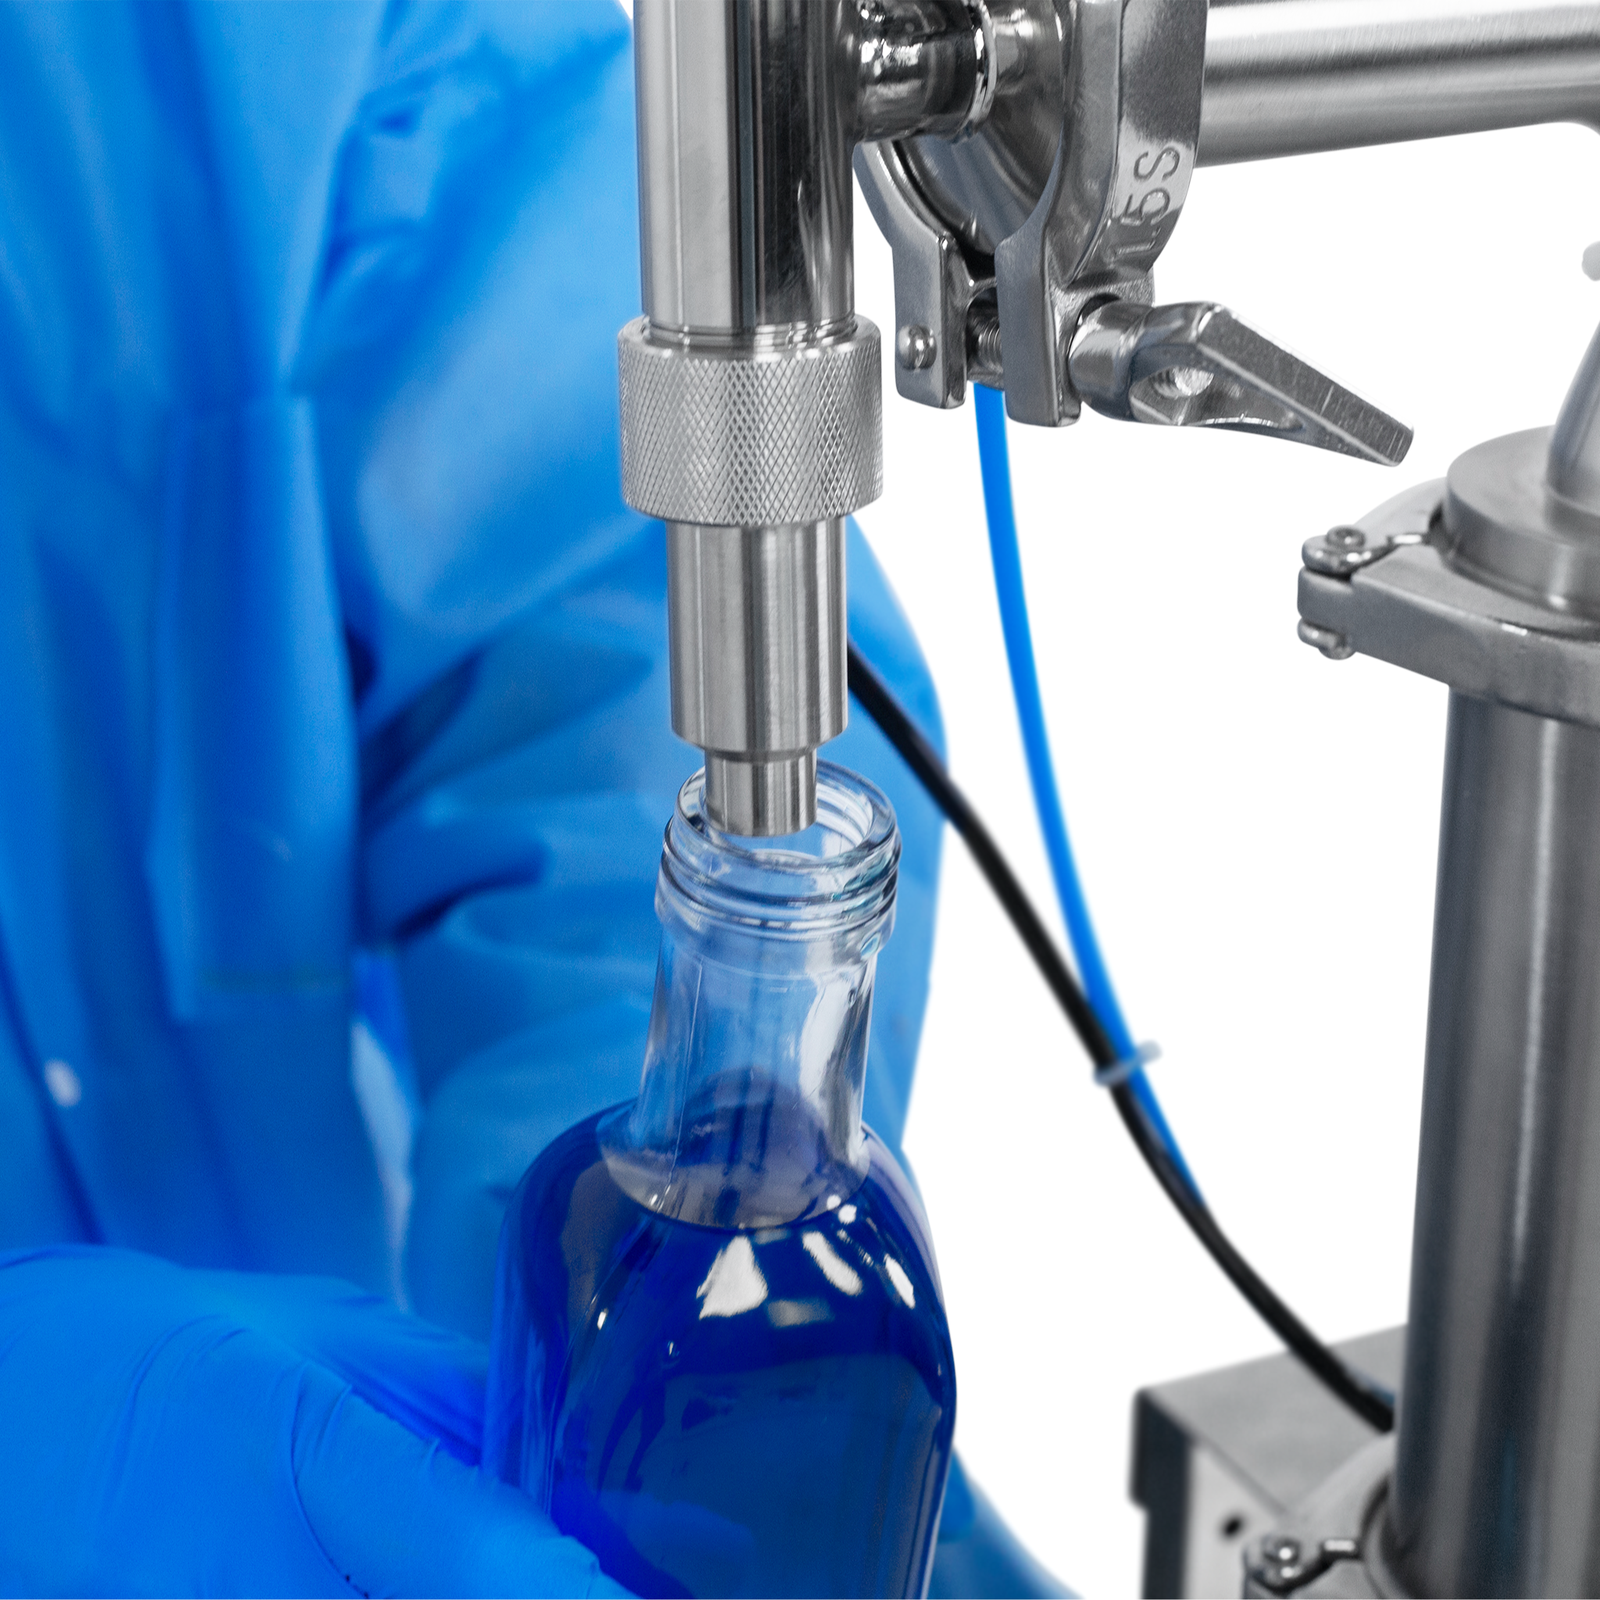 Worker wearing nitrile safety gloves operating the JORES TECHNOLOGIES® Low Viscosity Piston Filler for 1000ml bottles. The person is positioning a 1000ml bottle below the tip of the non-drip nozzle to be filled with accuracy by the liquid filling machine.